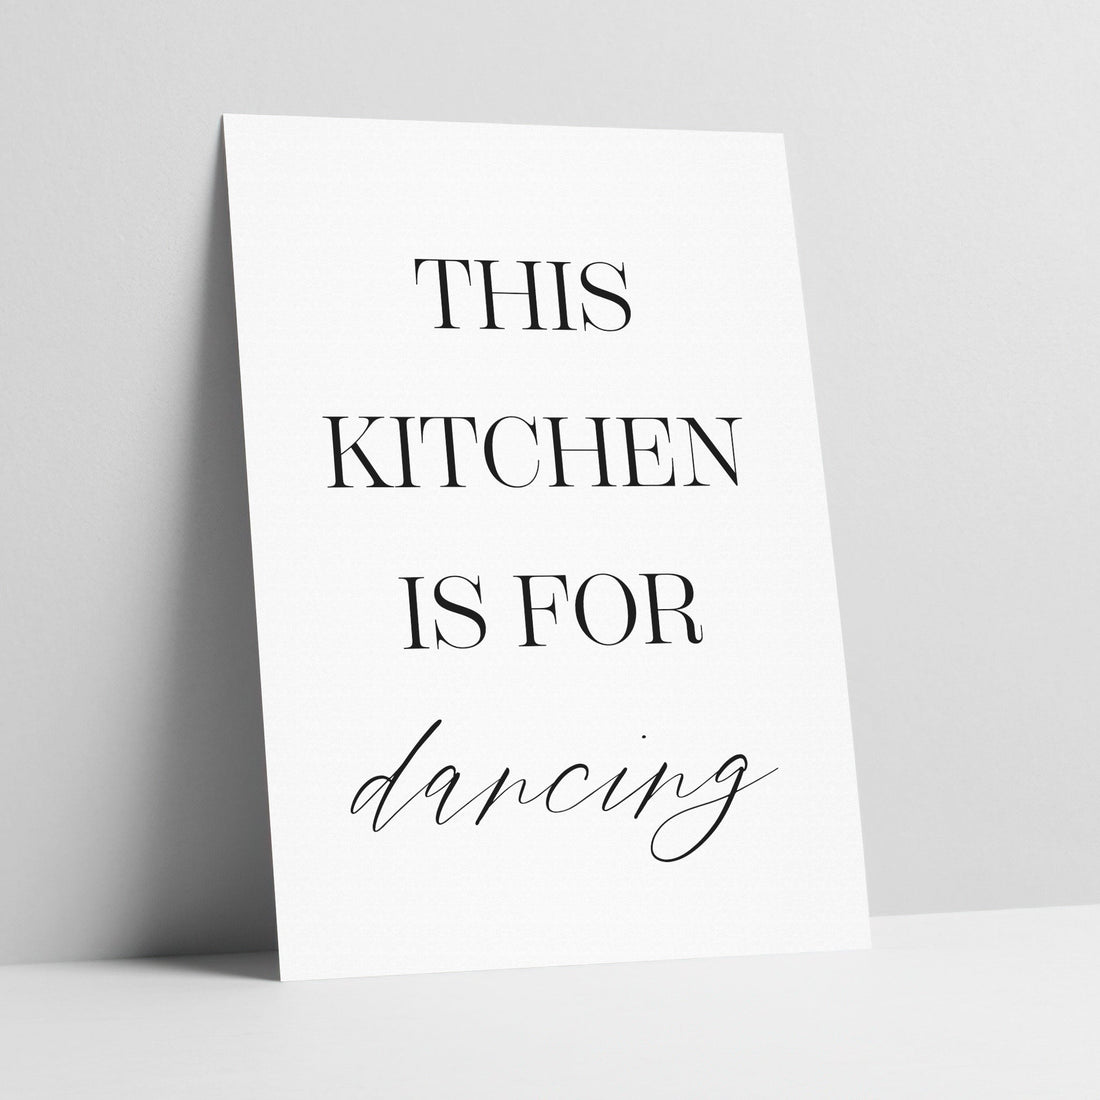 This Kitchen Is For Dancing - Kitchen Typography Art Print